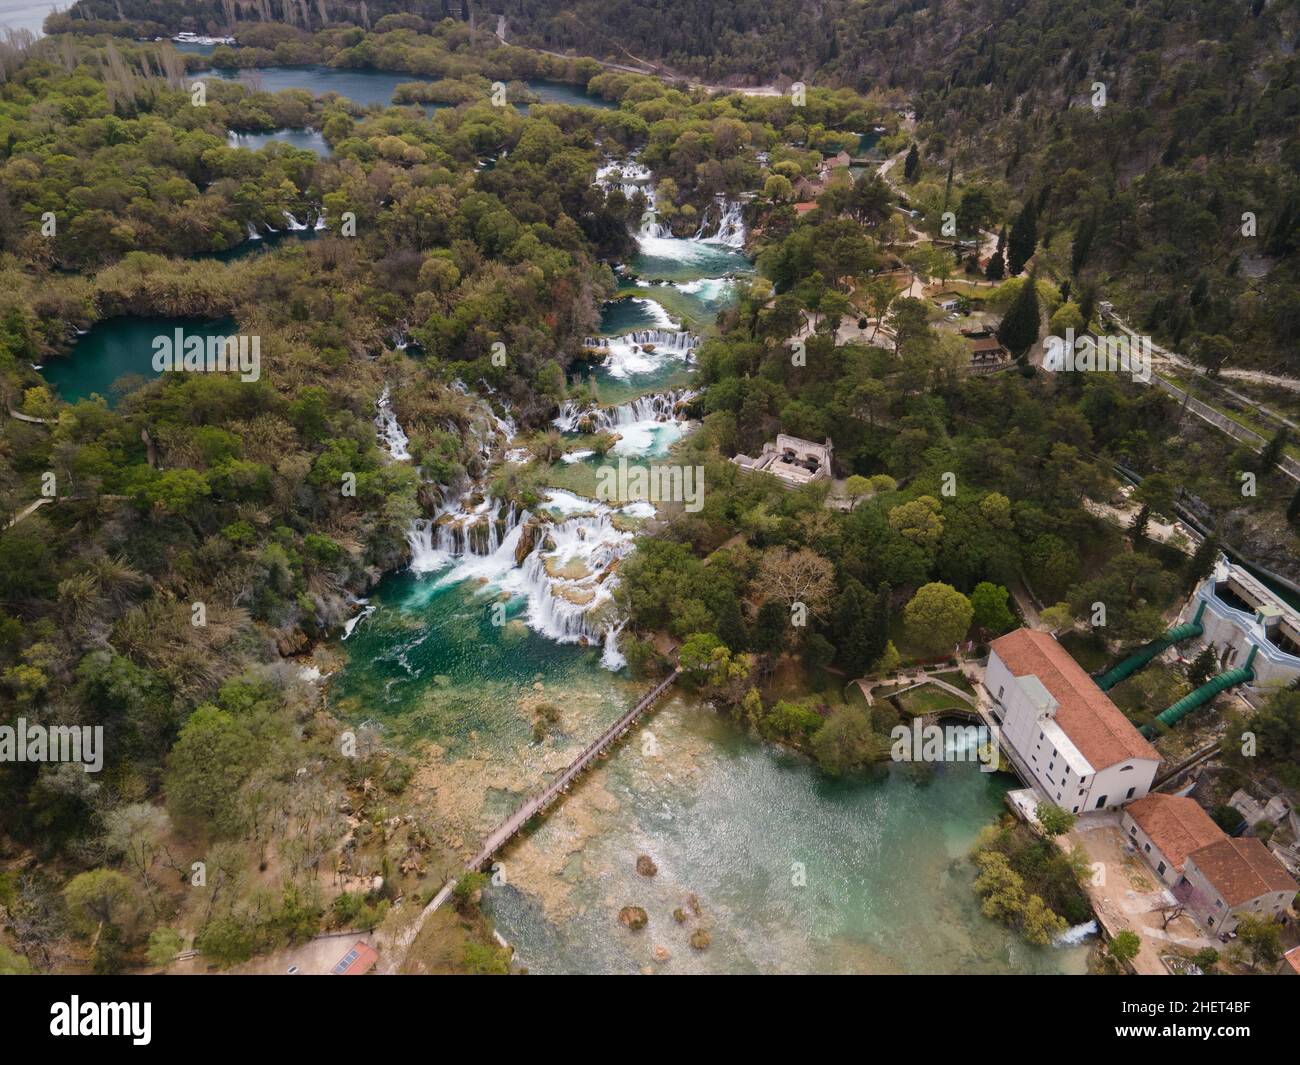 Aerial view of waterfalls, cascades in the krk national park, Croatia Stock Photo